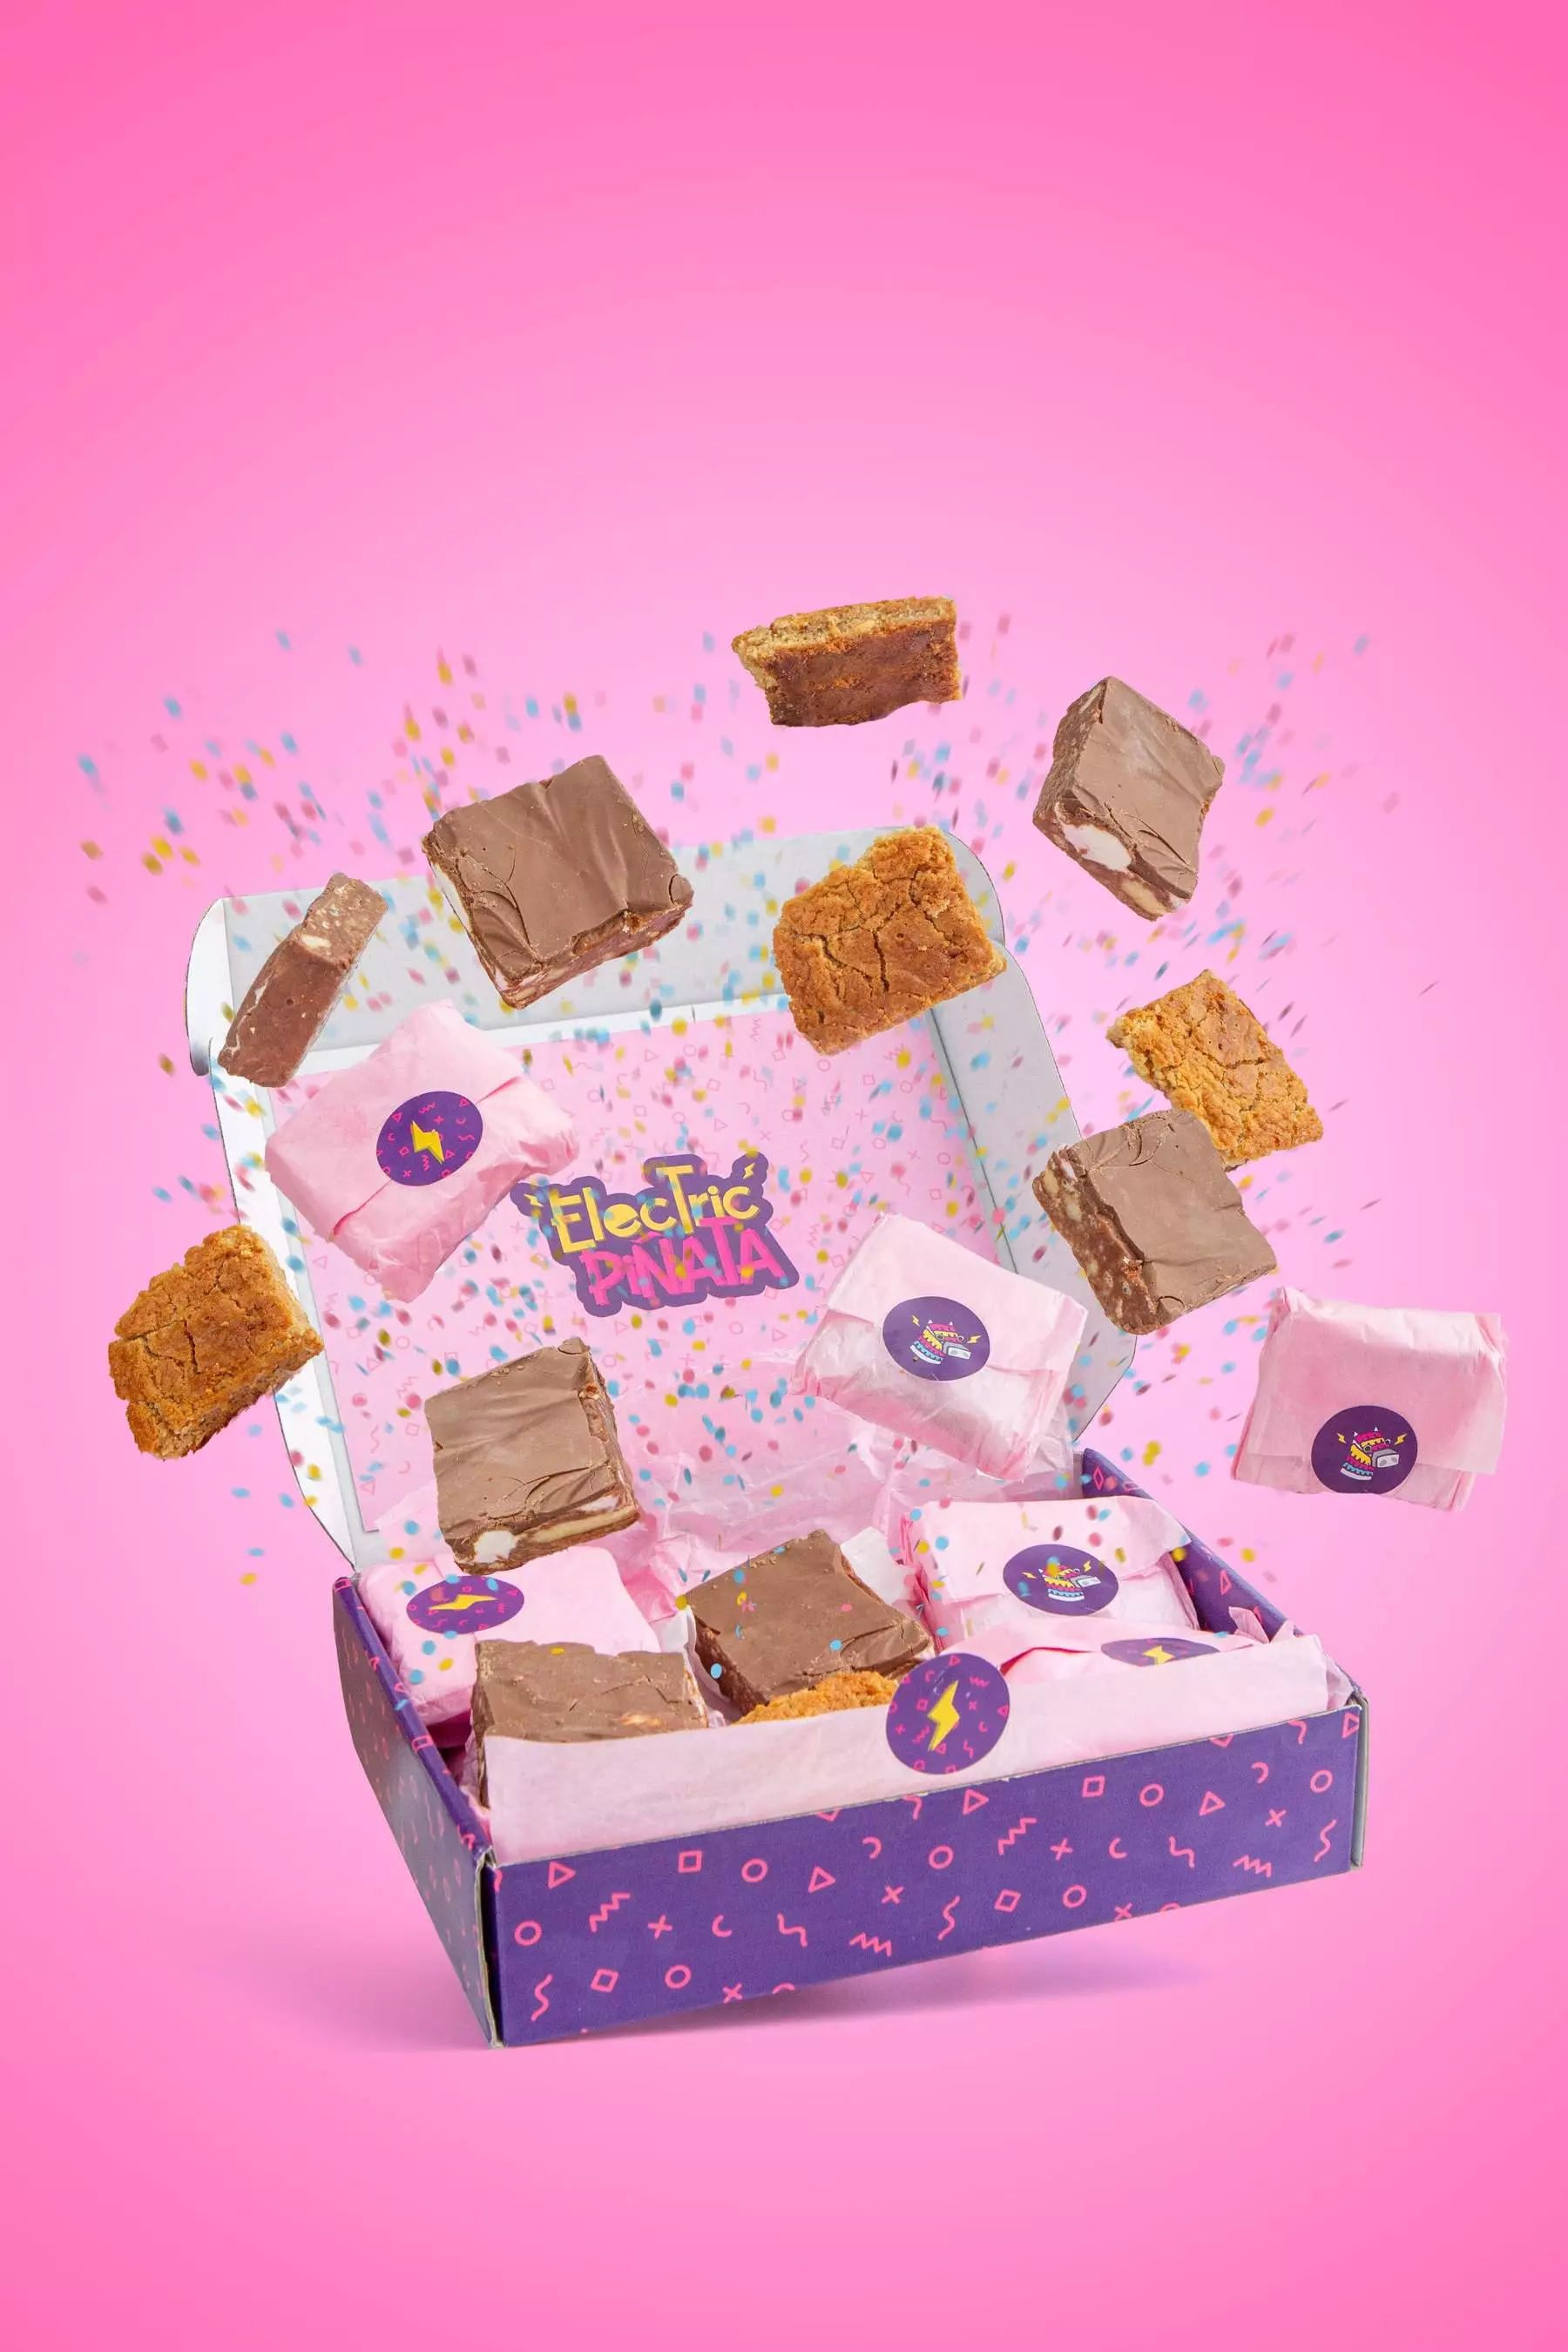 Electric Piñata have a full range of delicious treats you could get paid to try (